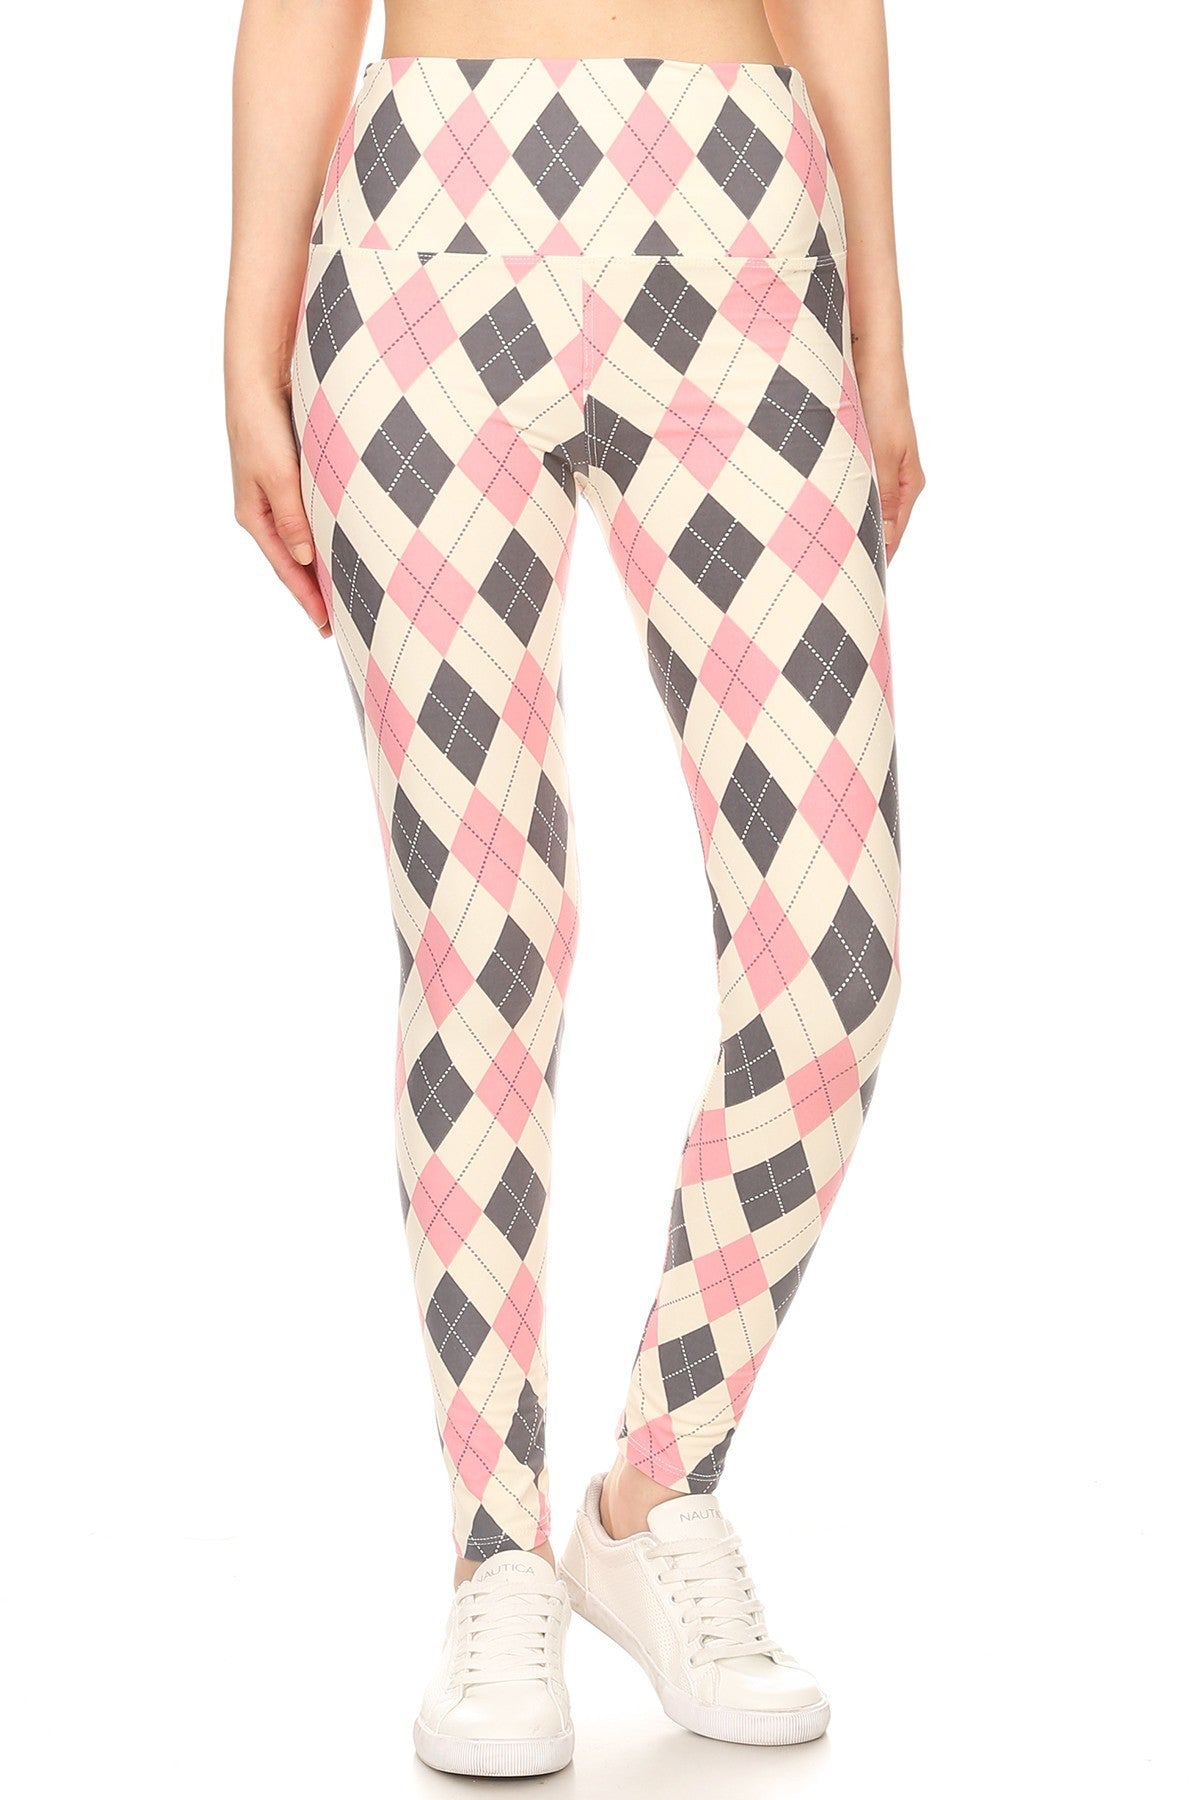 5-inch Long Yoga Style Banded Lined Argyle Printed Knit Legging With High Waist Naughty Smile Fashion